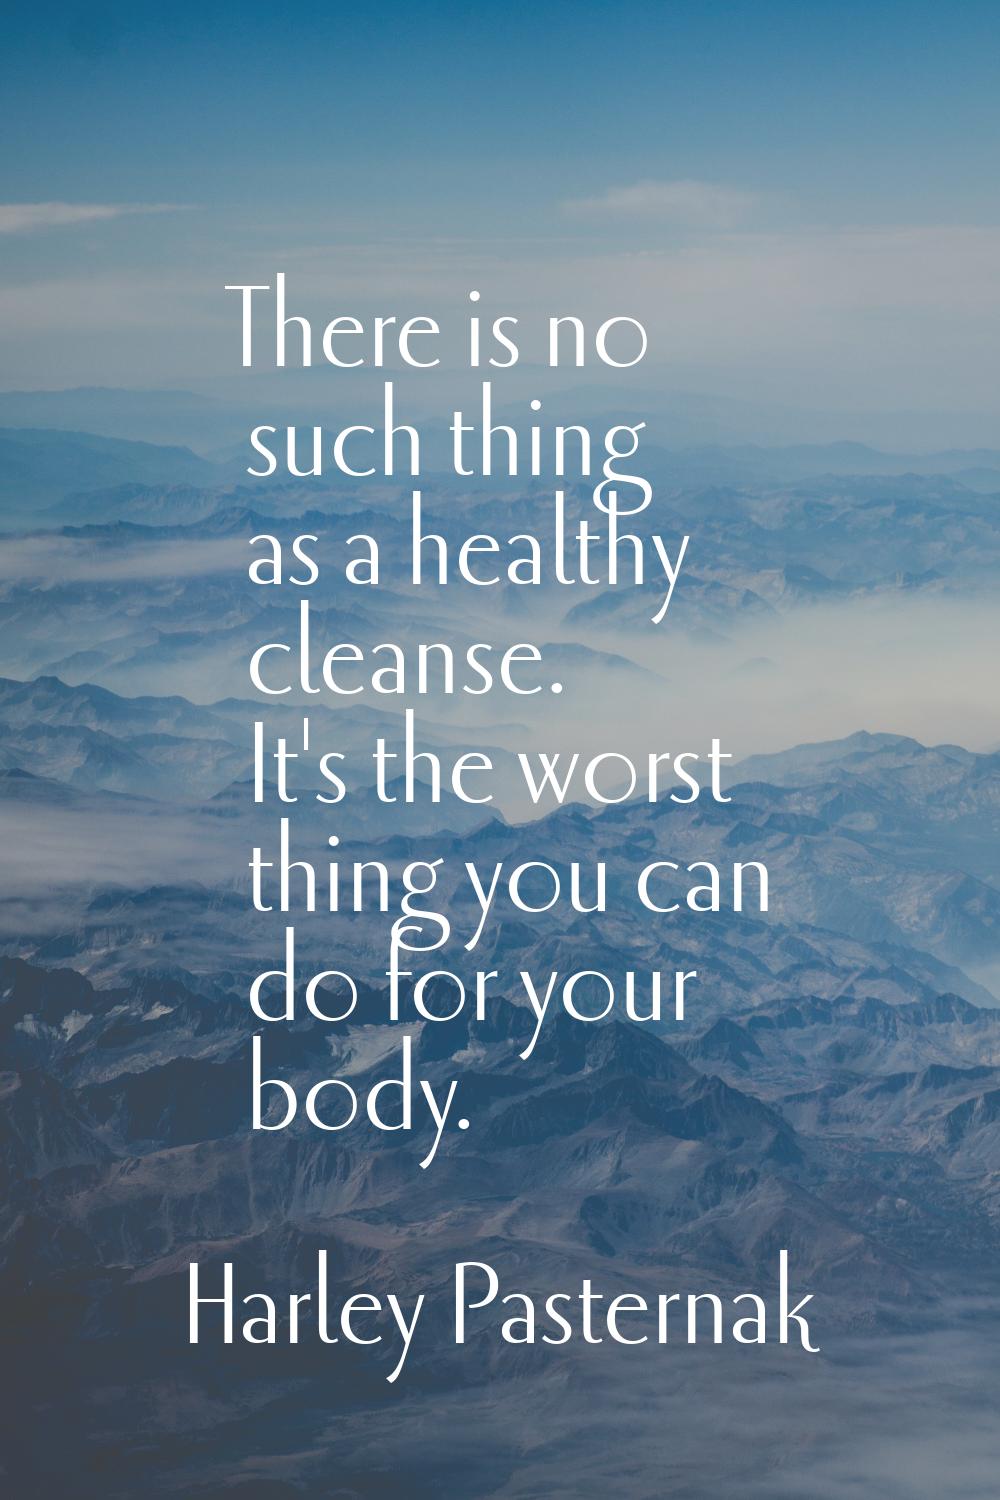 There is no such thing as a healthy cleanse. It's the worst thing you can do for your body.